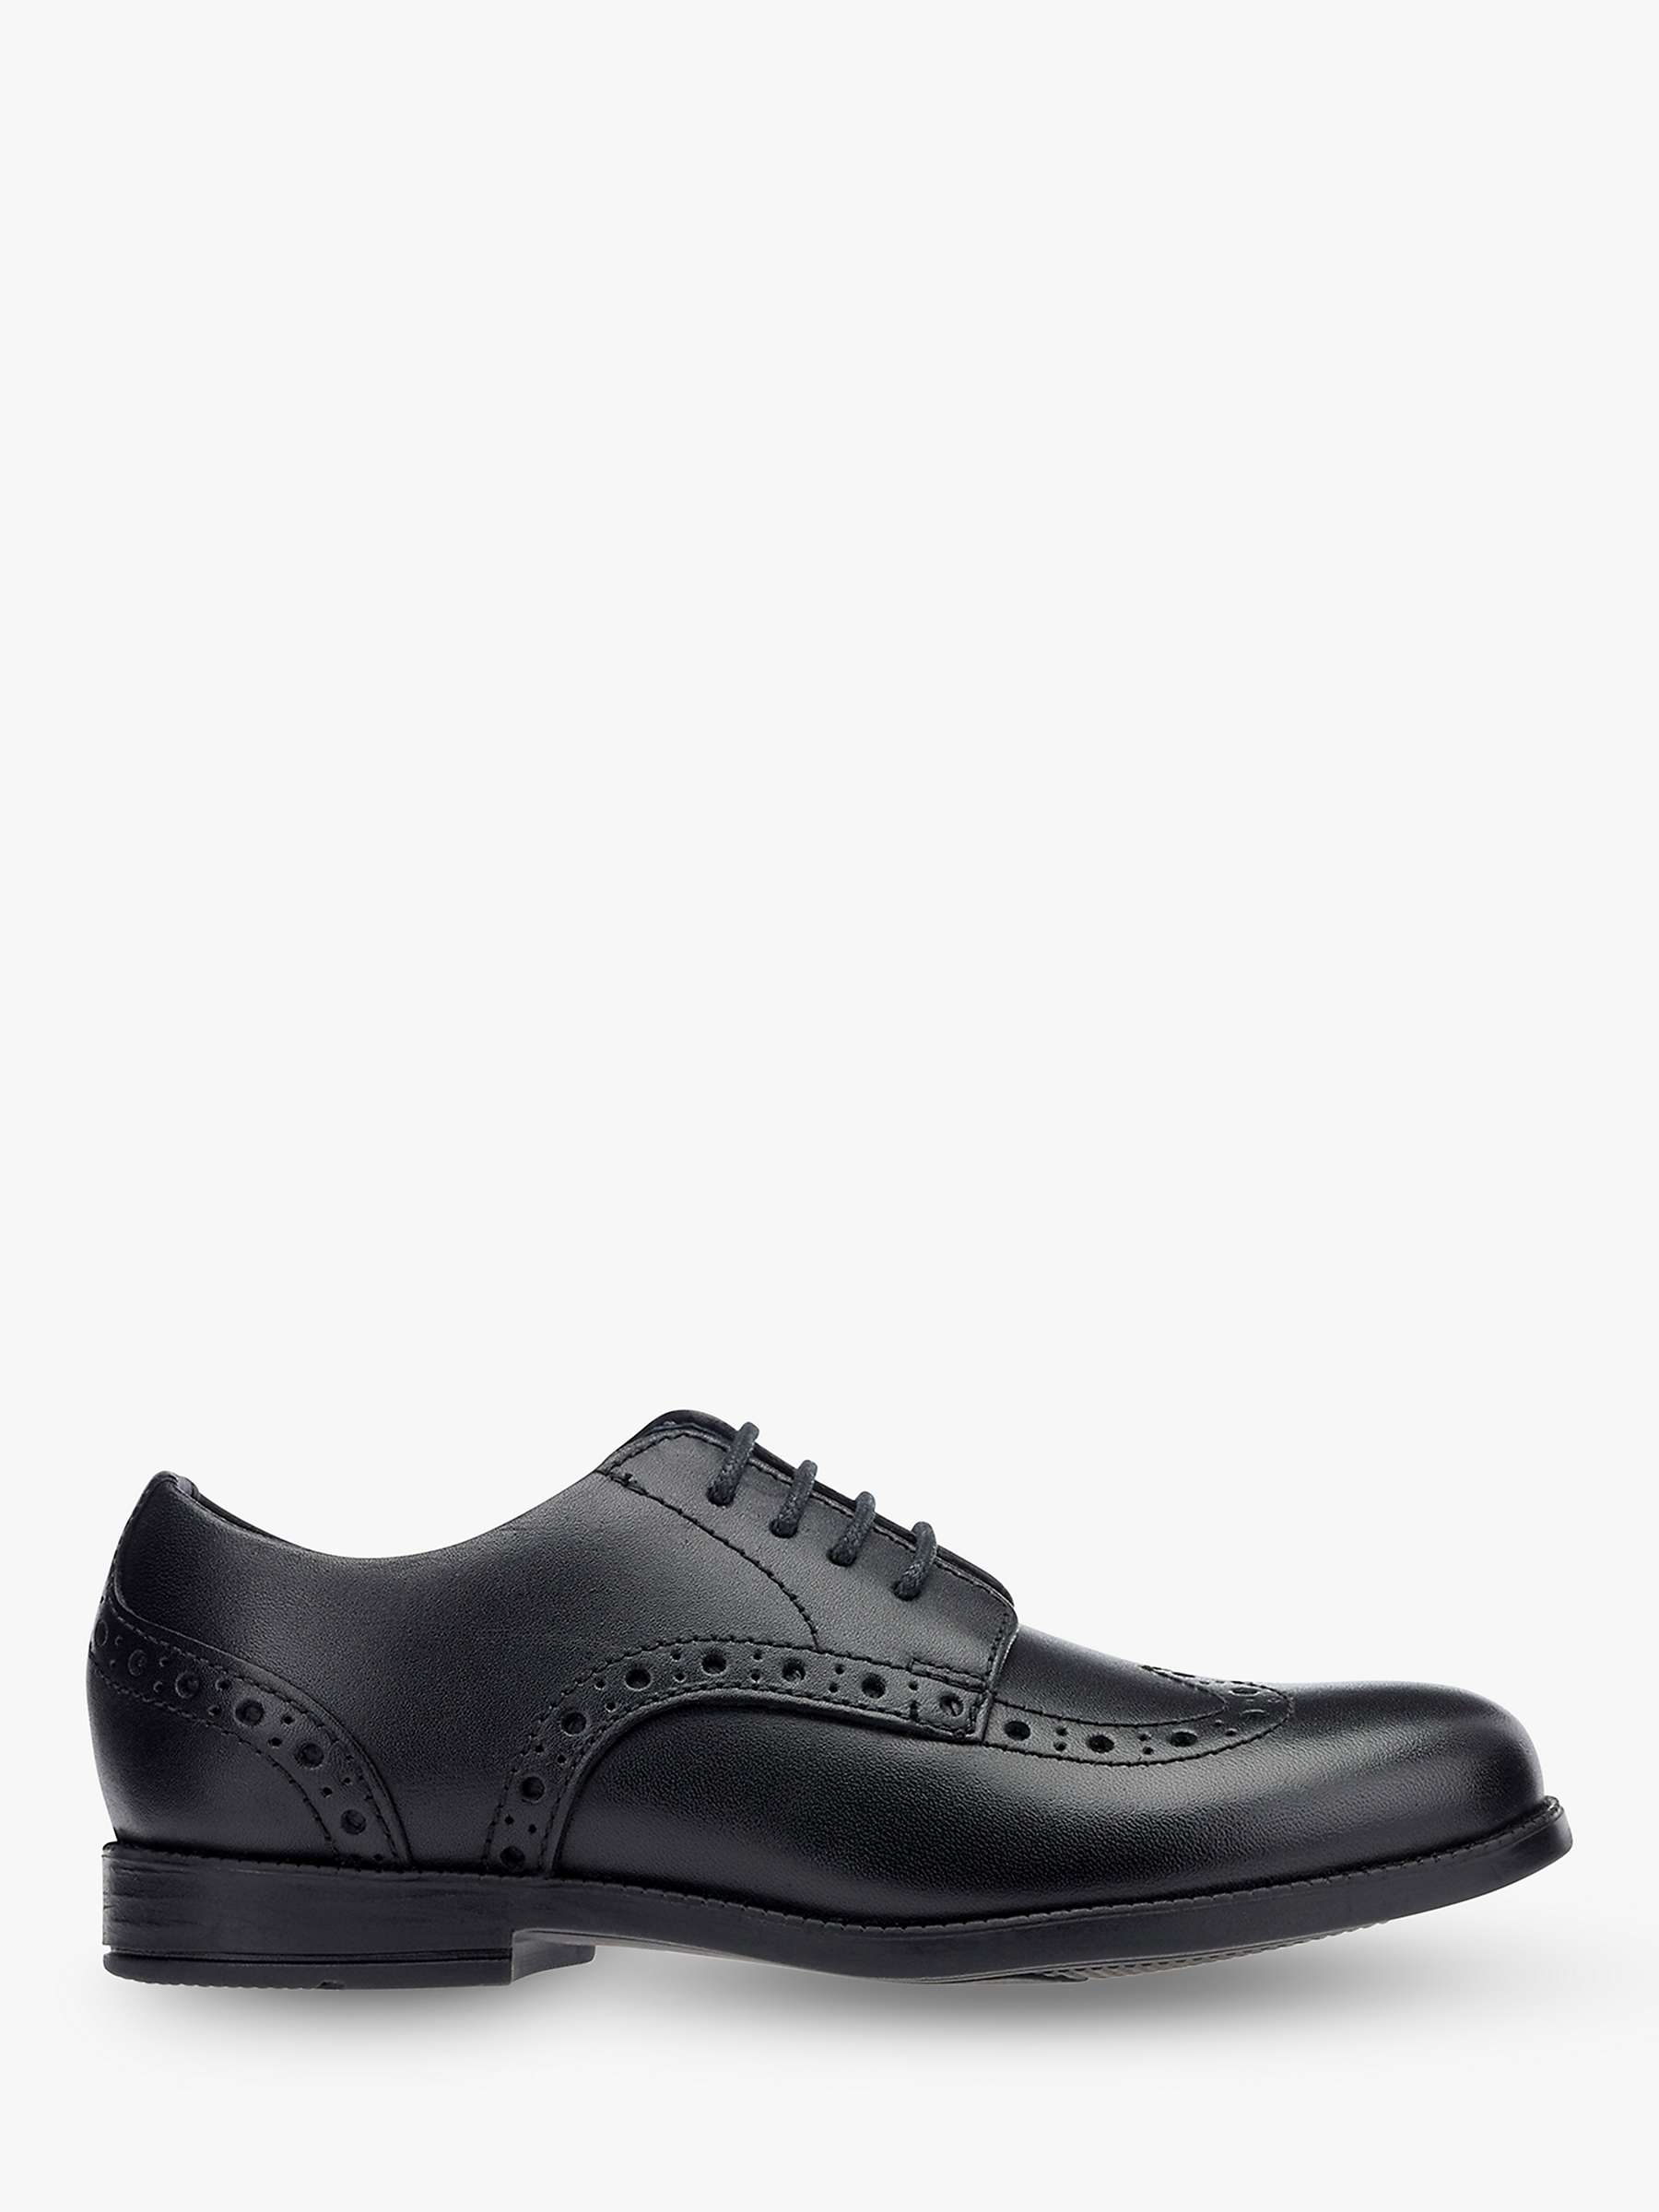 Buy Start-Rite Children's Leather Brogue Shoes, Black Online at johnlewis.com